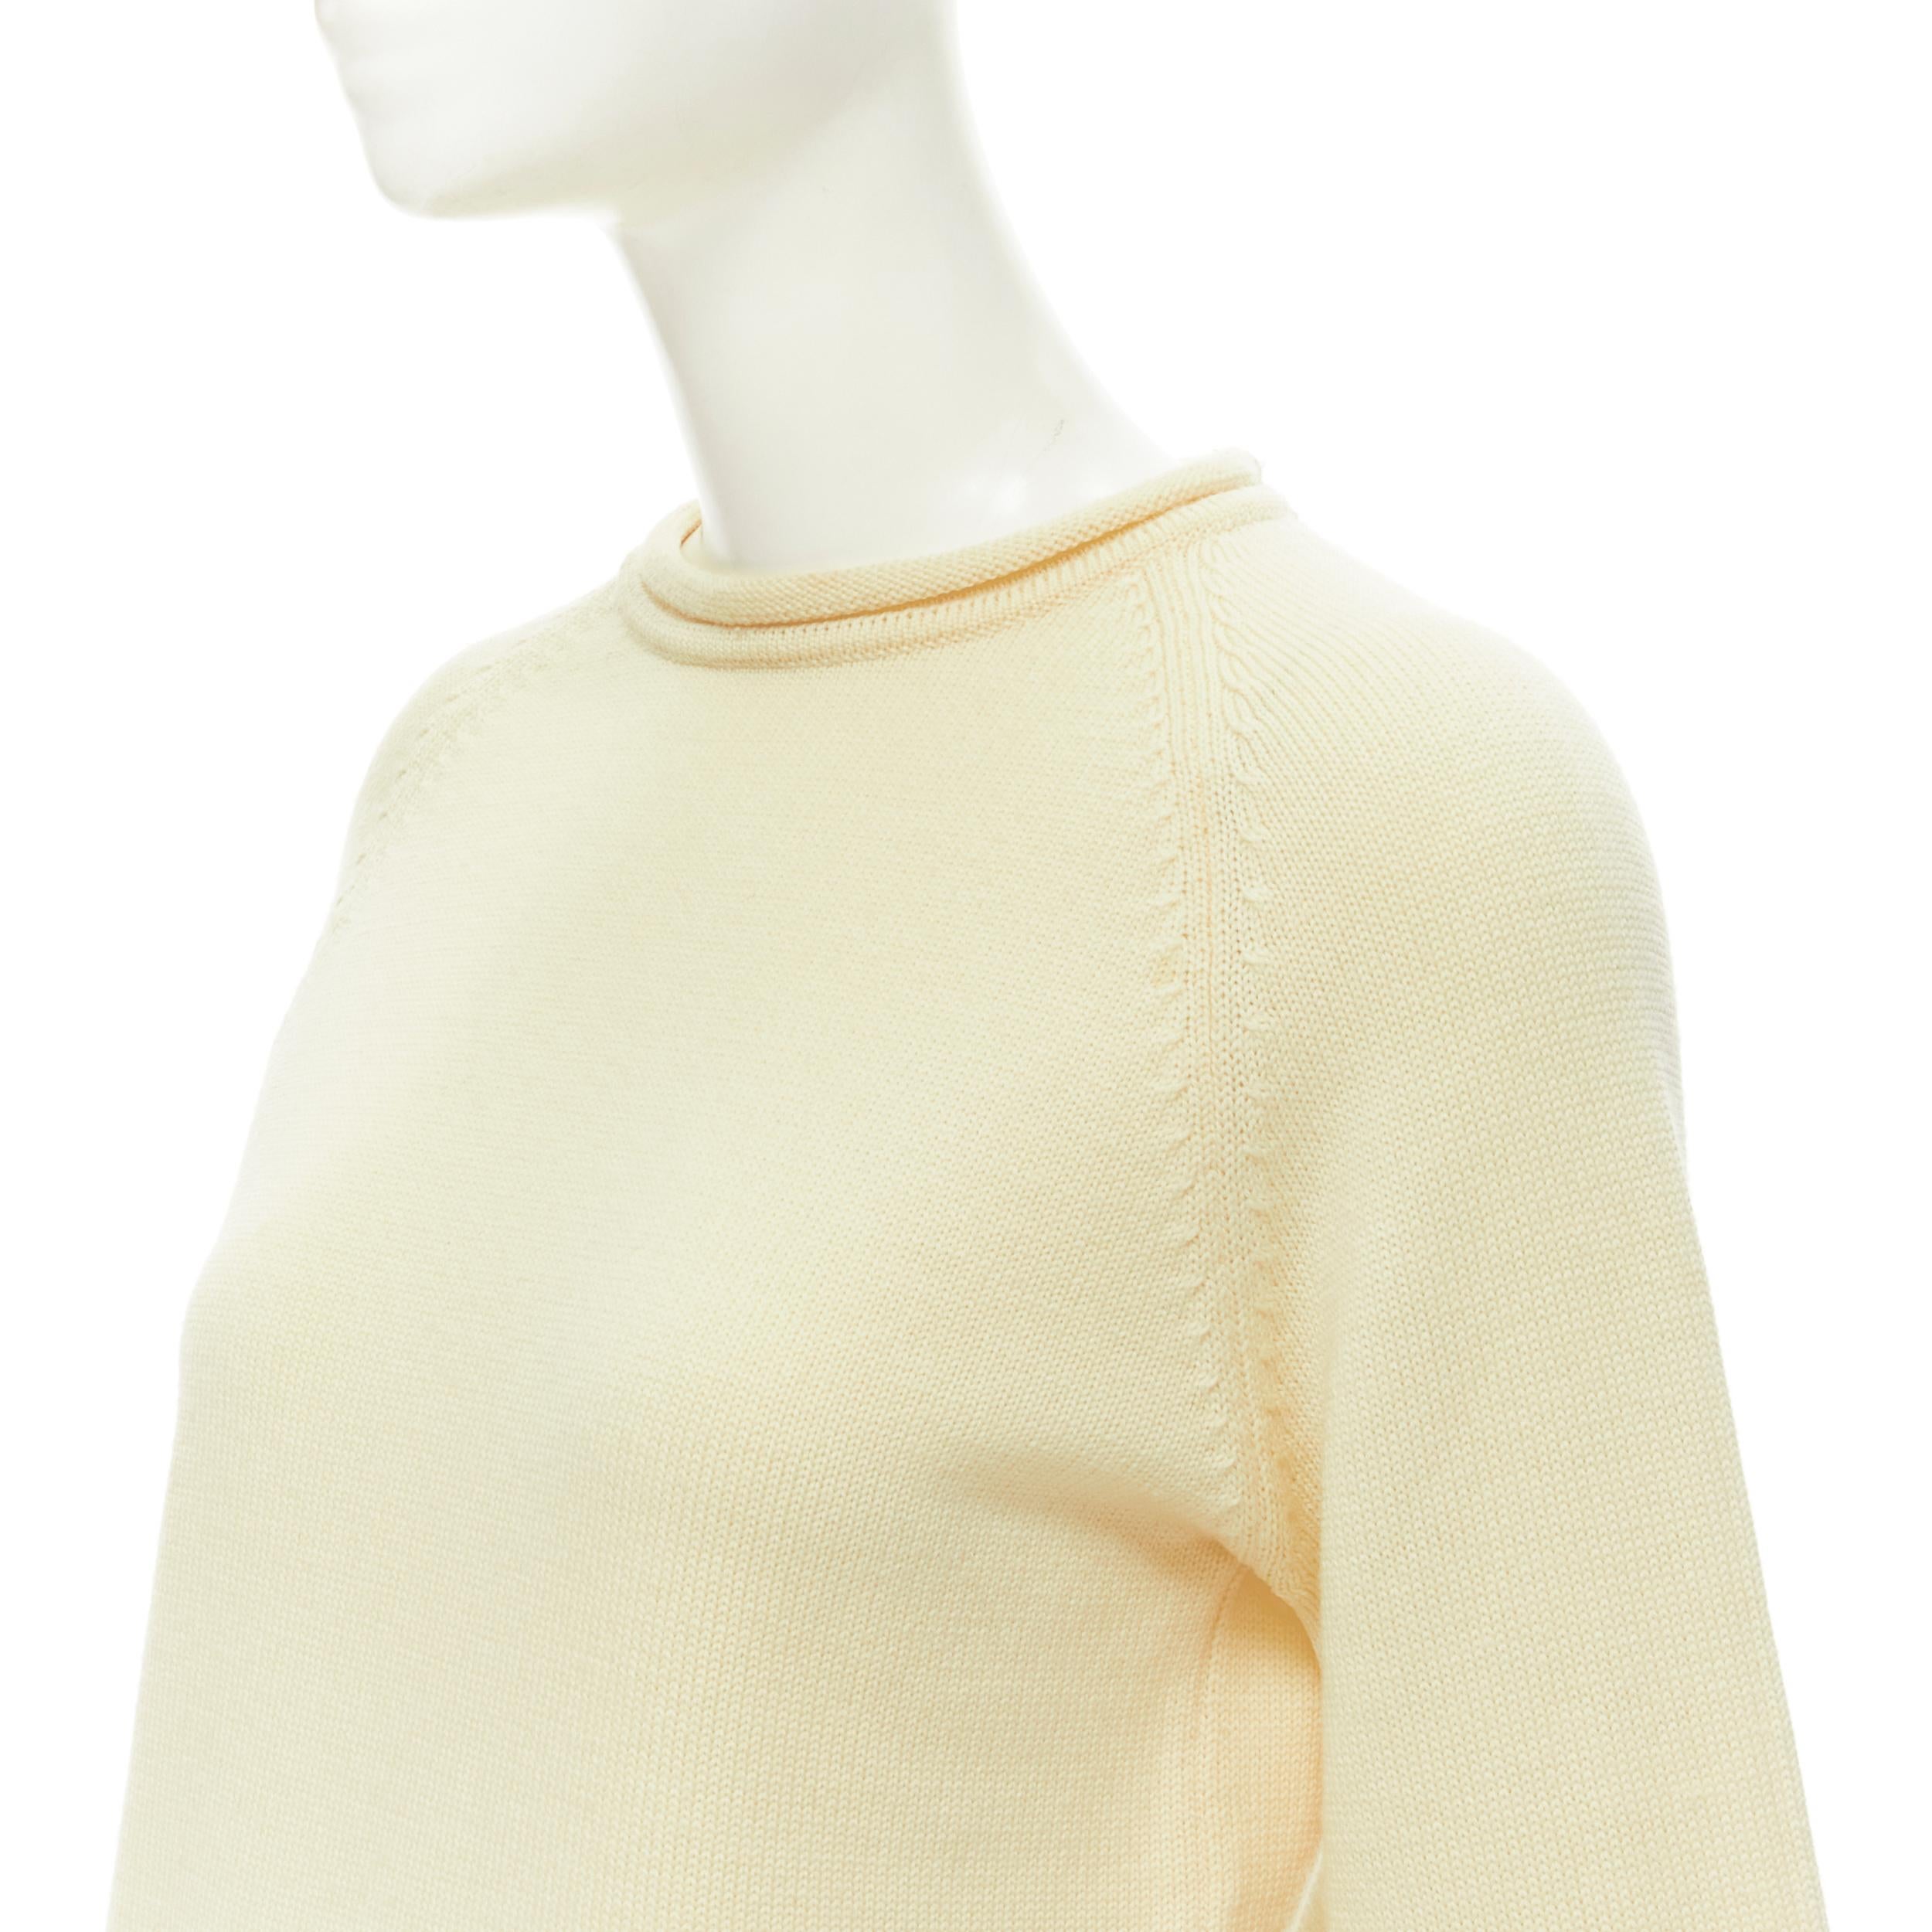 YOHJI YAMAMOTO cream beige 100% wool rolled edge wide sleeve sweater M 
Reference: AEMA/A00063 
Brand: Yohji Yamamoto 
Material: Wool 
Color: Cream 
Pattern: Solid 
Extra Detail: Rolled neck and rolled detailing at cuff and hem. 

CONDITION: